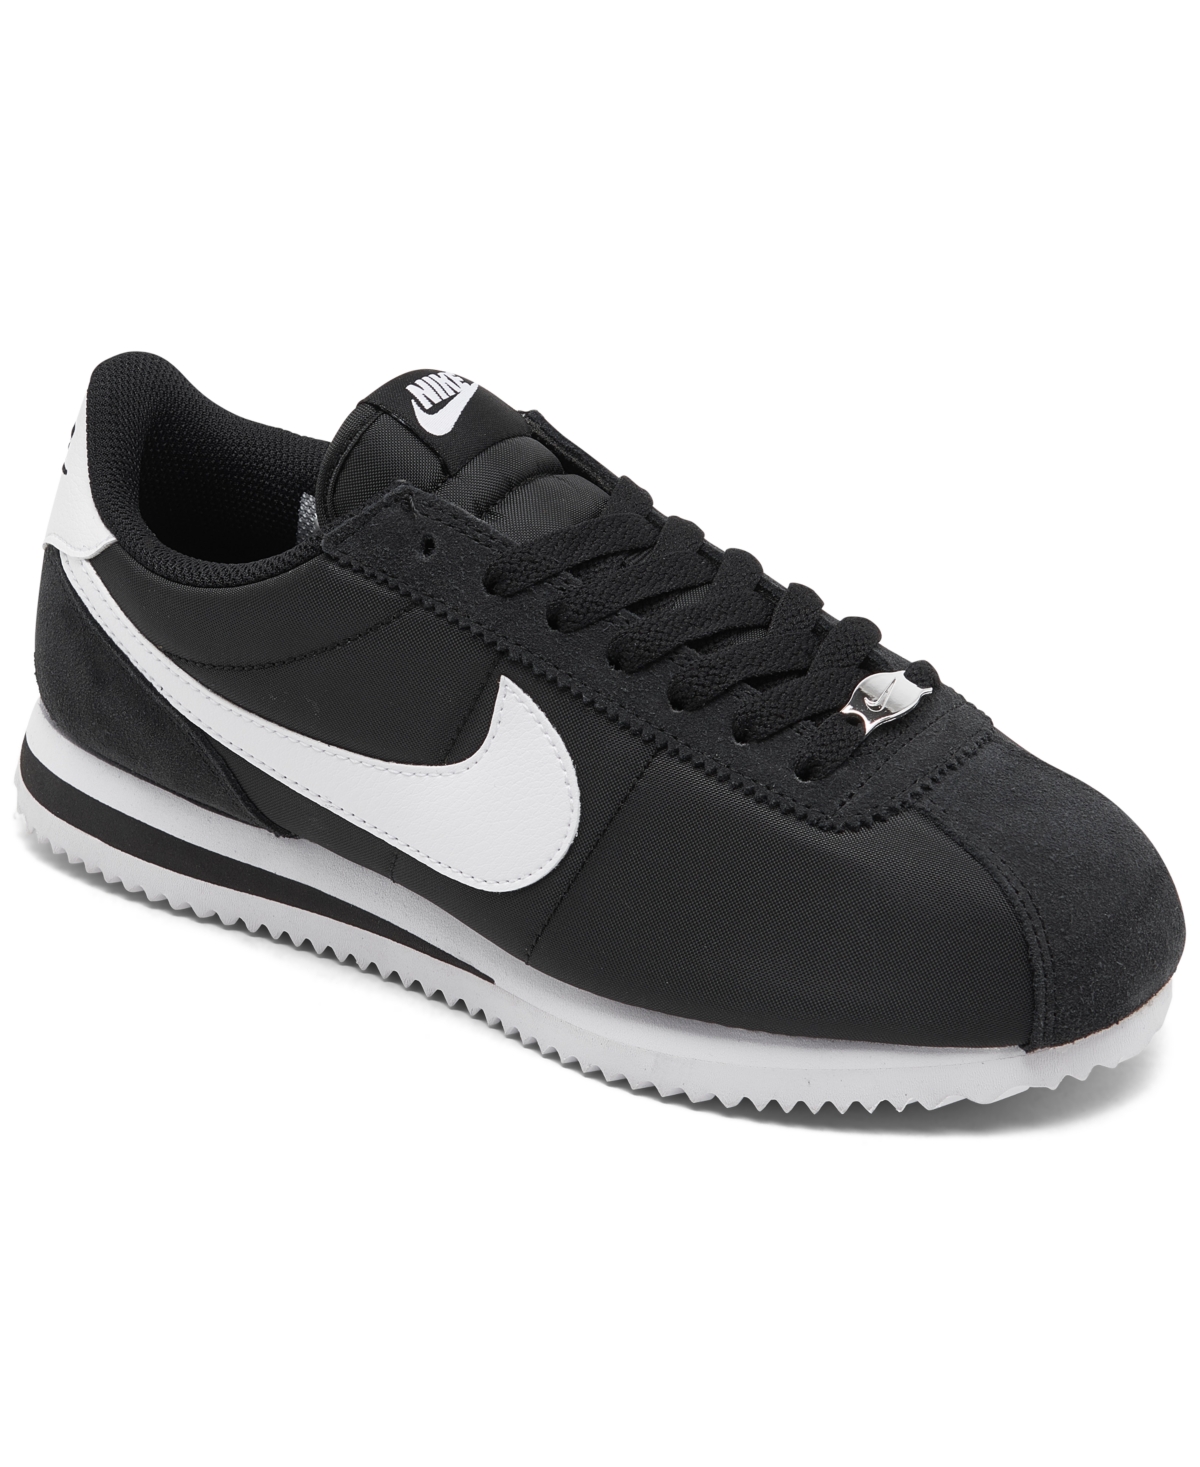 Women's Classic Cortez Nylon Casual Sneakers from Finish Line - Mnnavy/whi